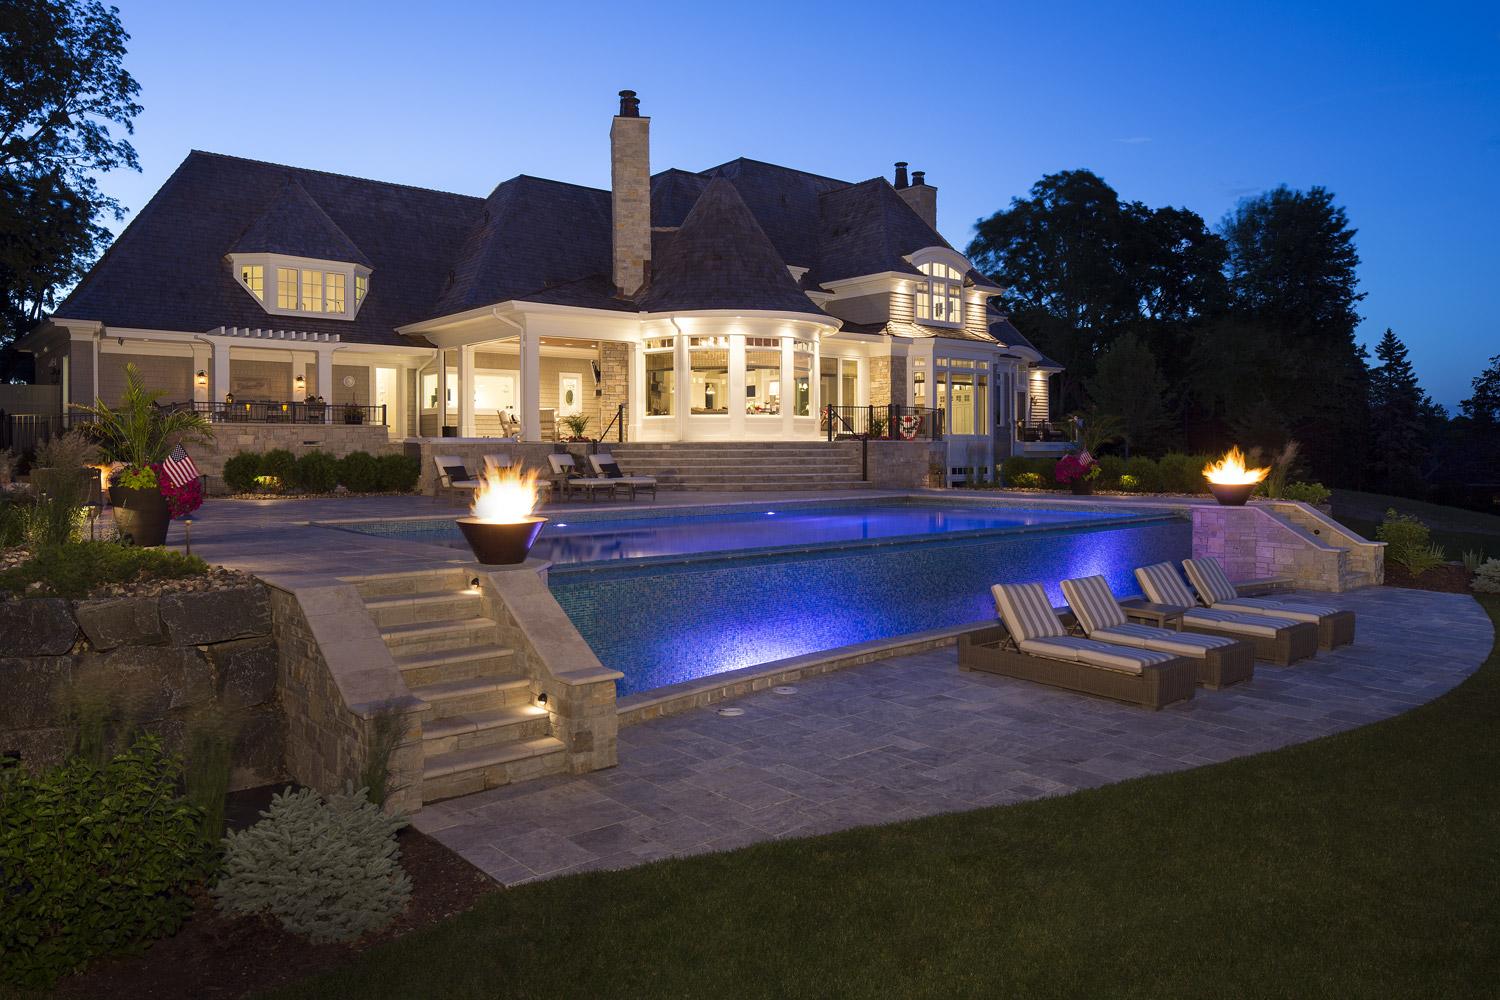 Landscaping with fire features and night lighting